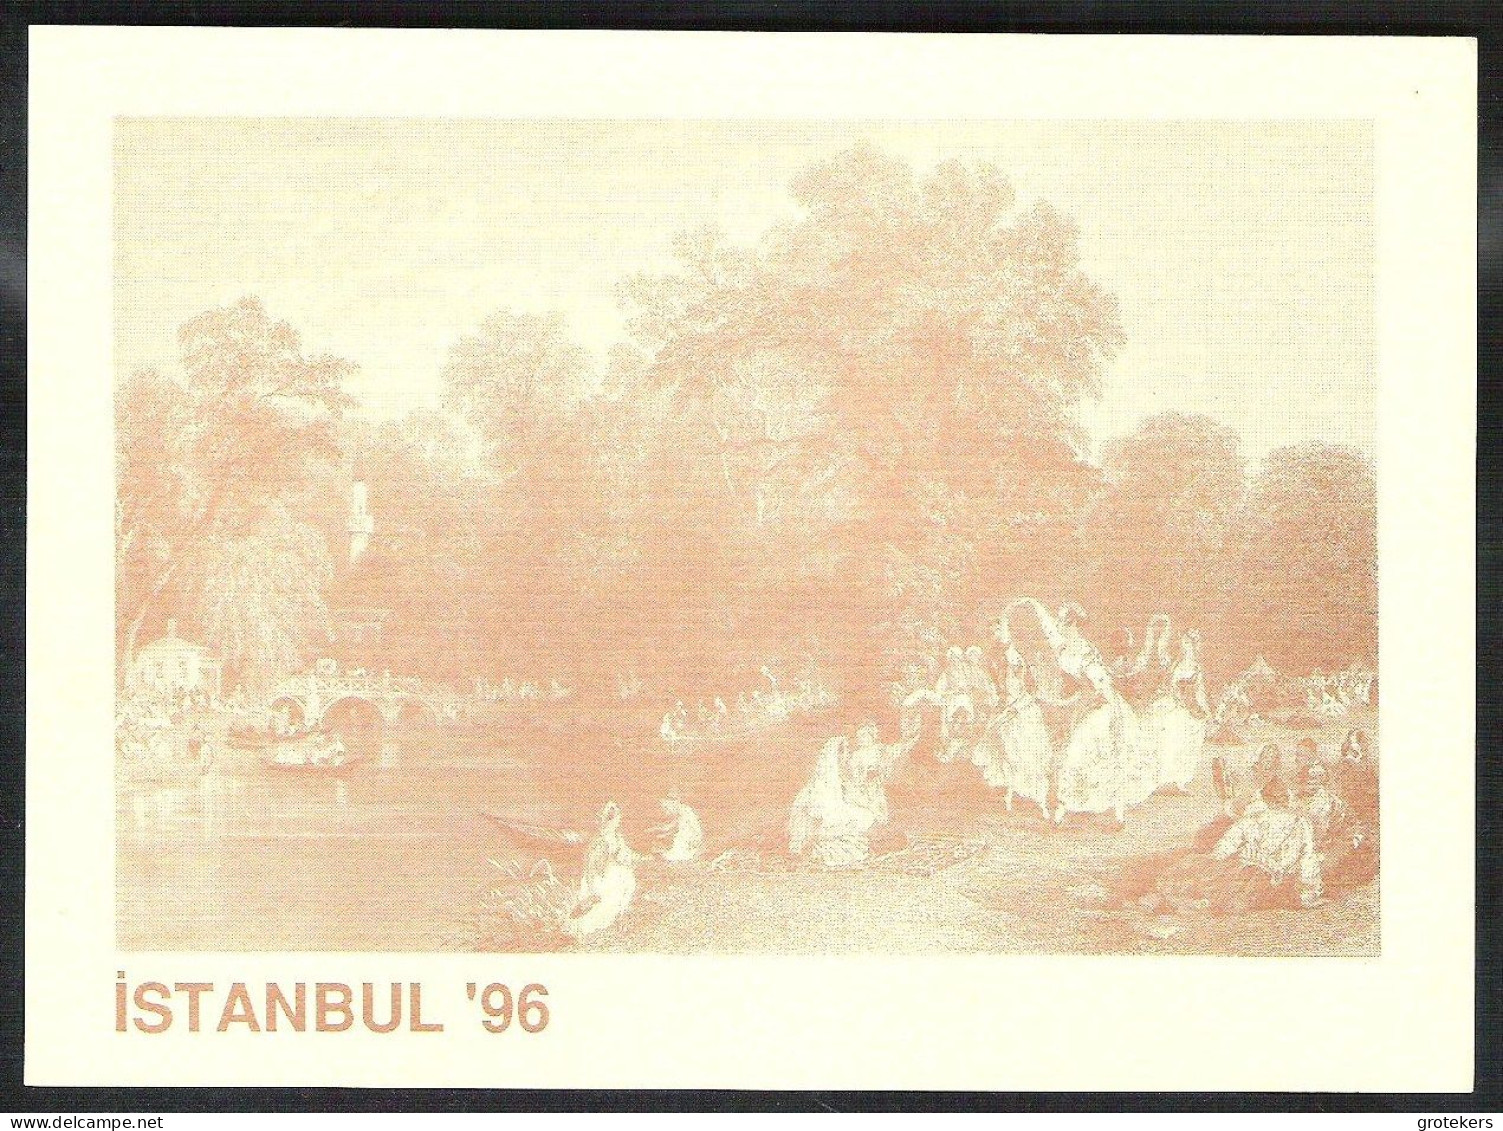 ISTANBUL (ancient Scene) Invitation For Istanbul 96 International Stamp Exhibition 2 Different Cards - Türkei